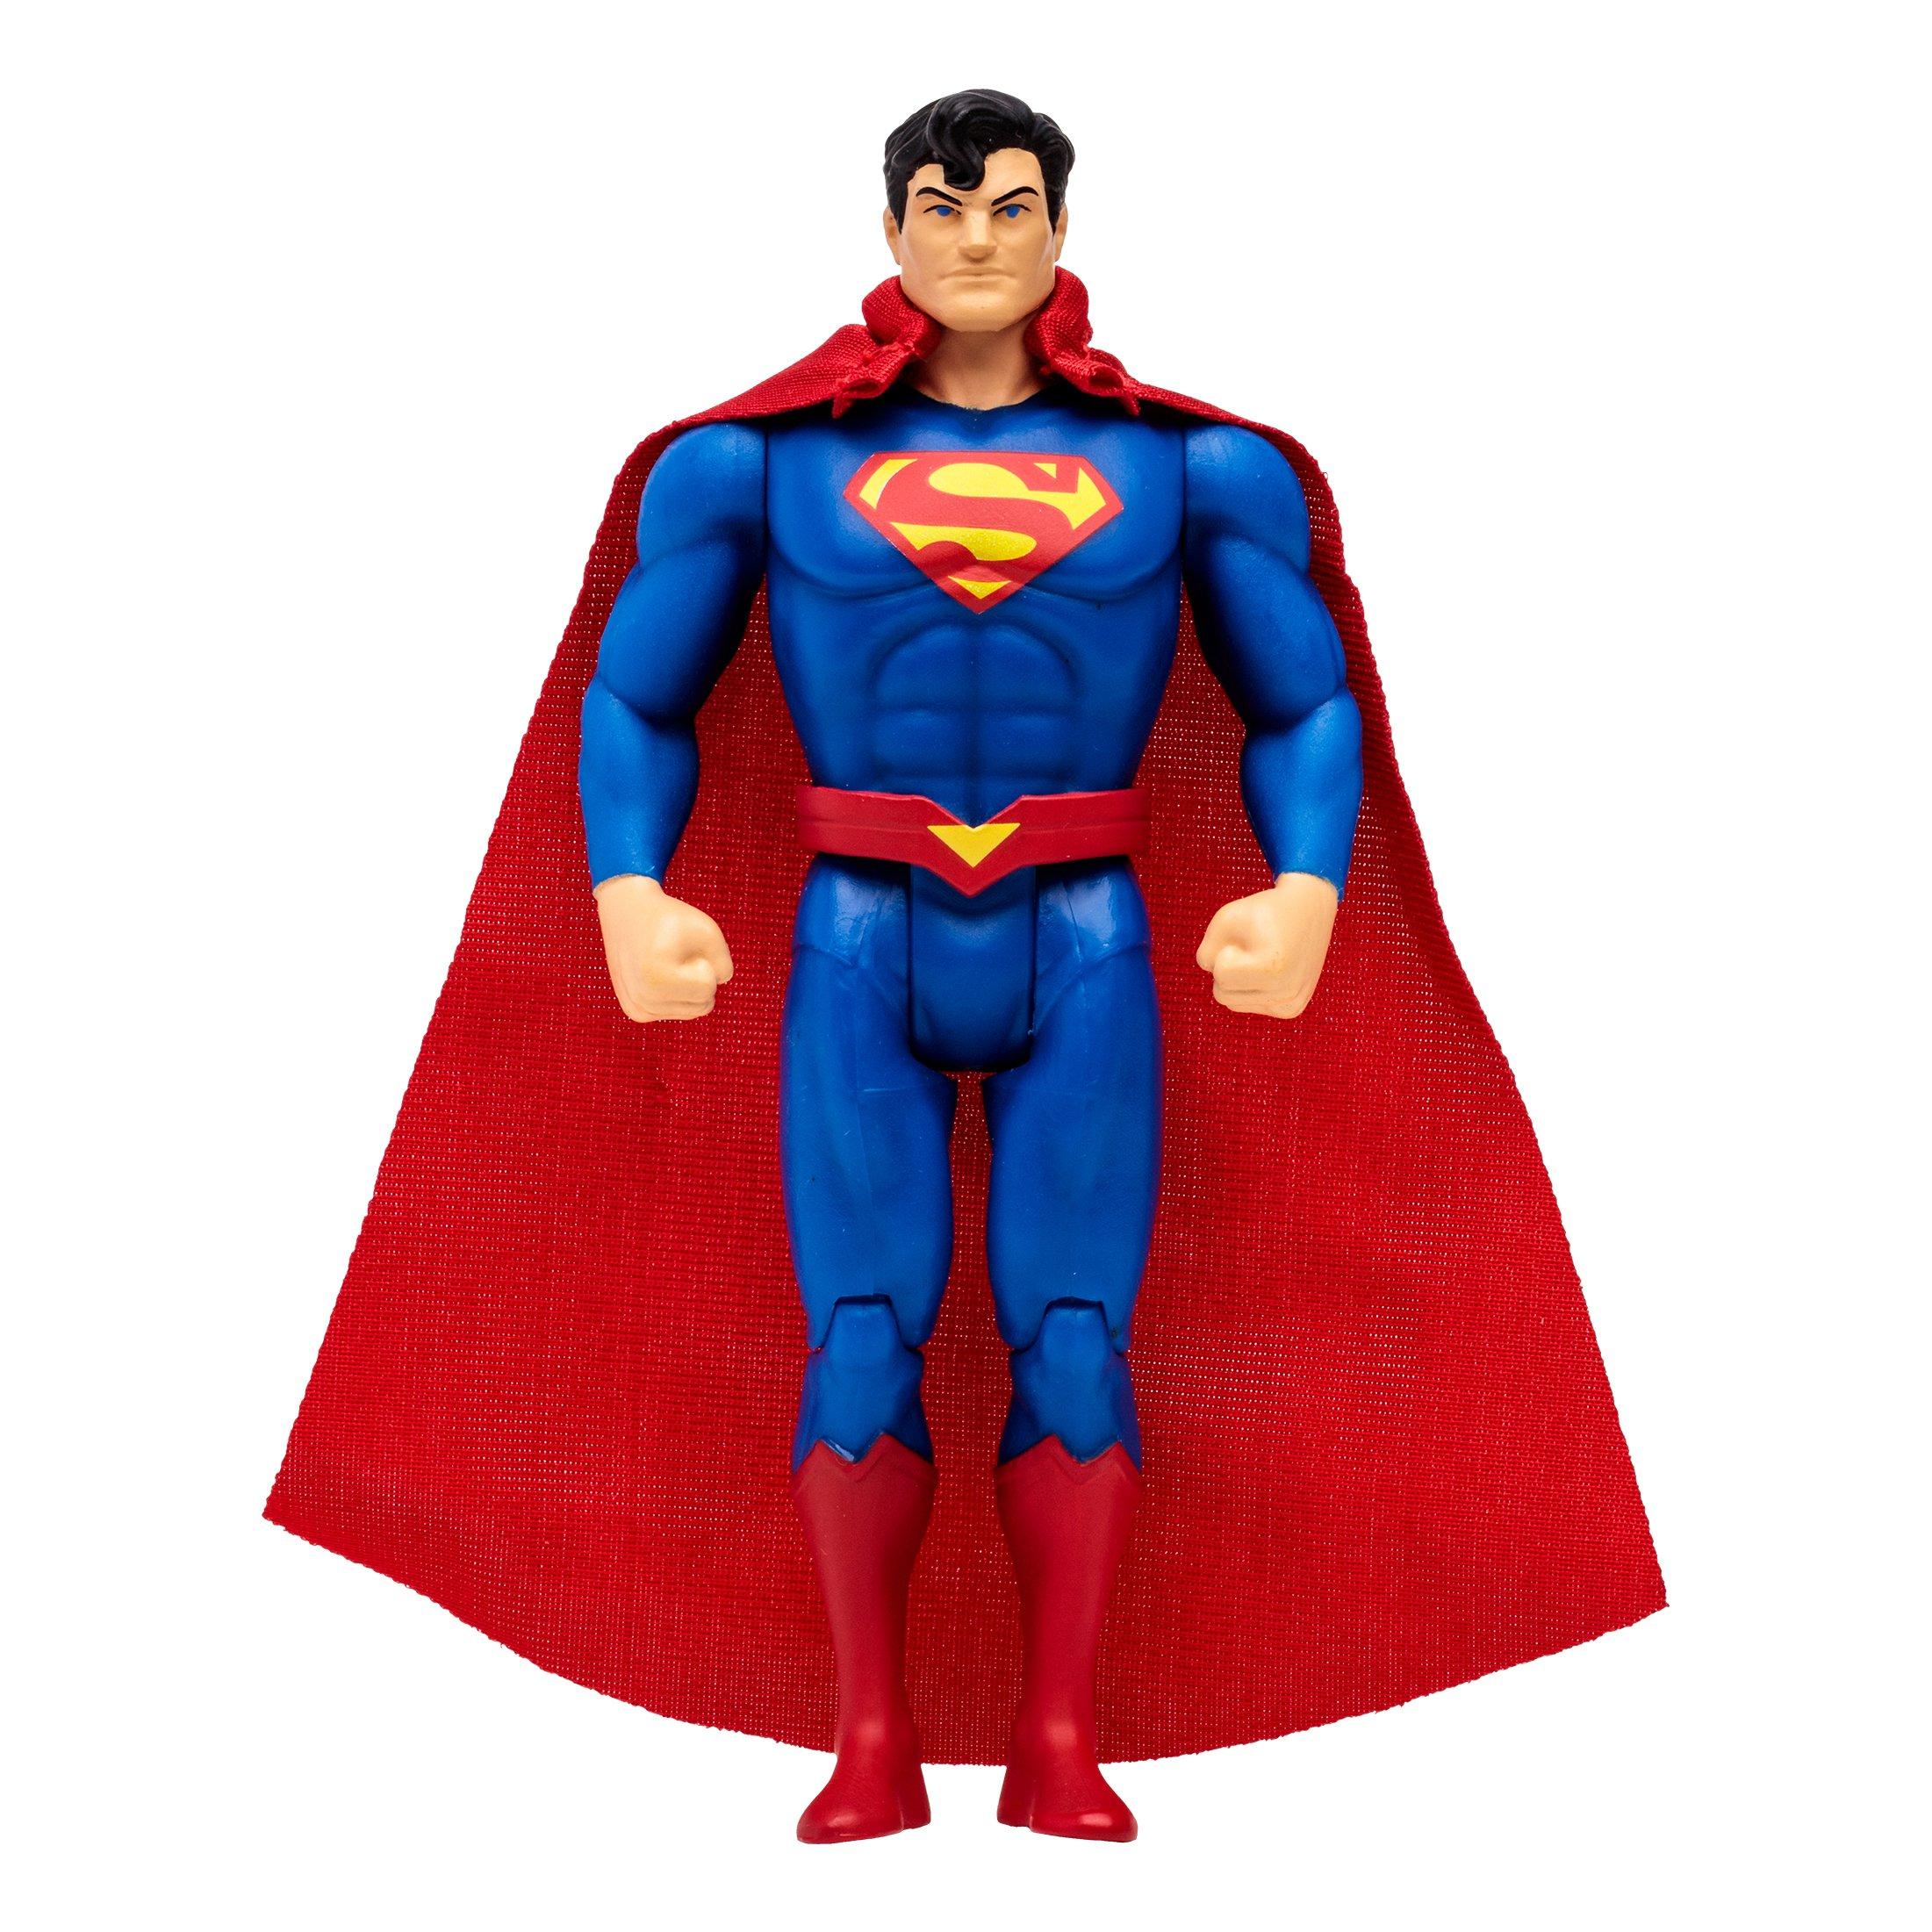 McFarlane Toys DC Direct Super Powers Superman 4.5-in Action Figure